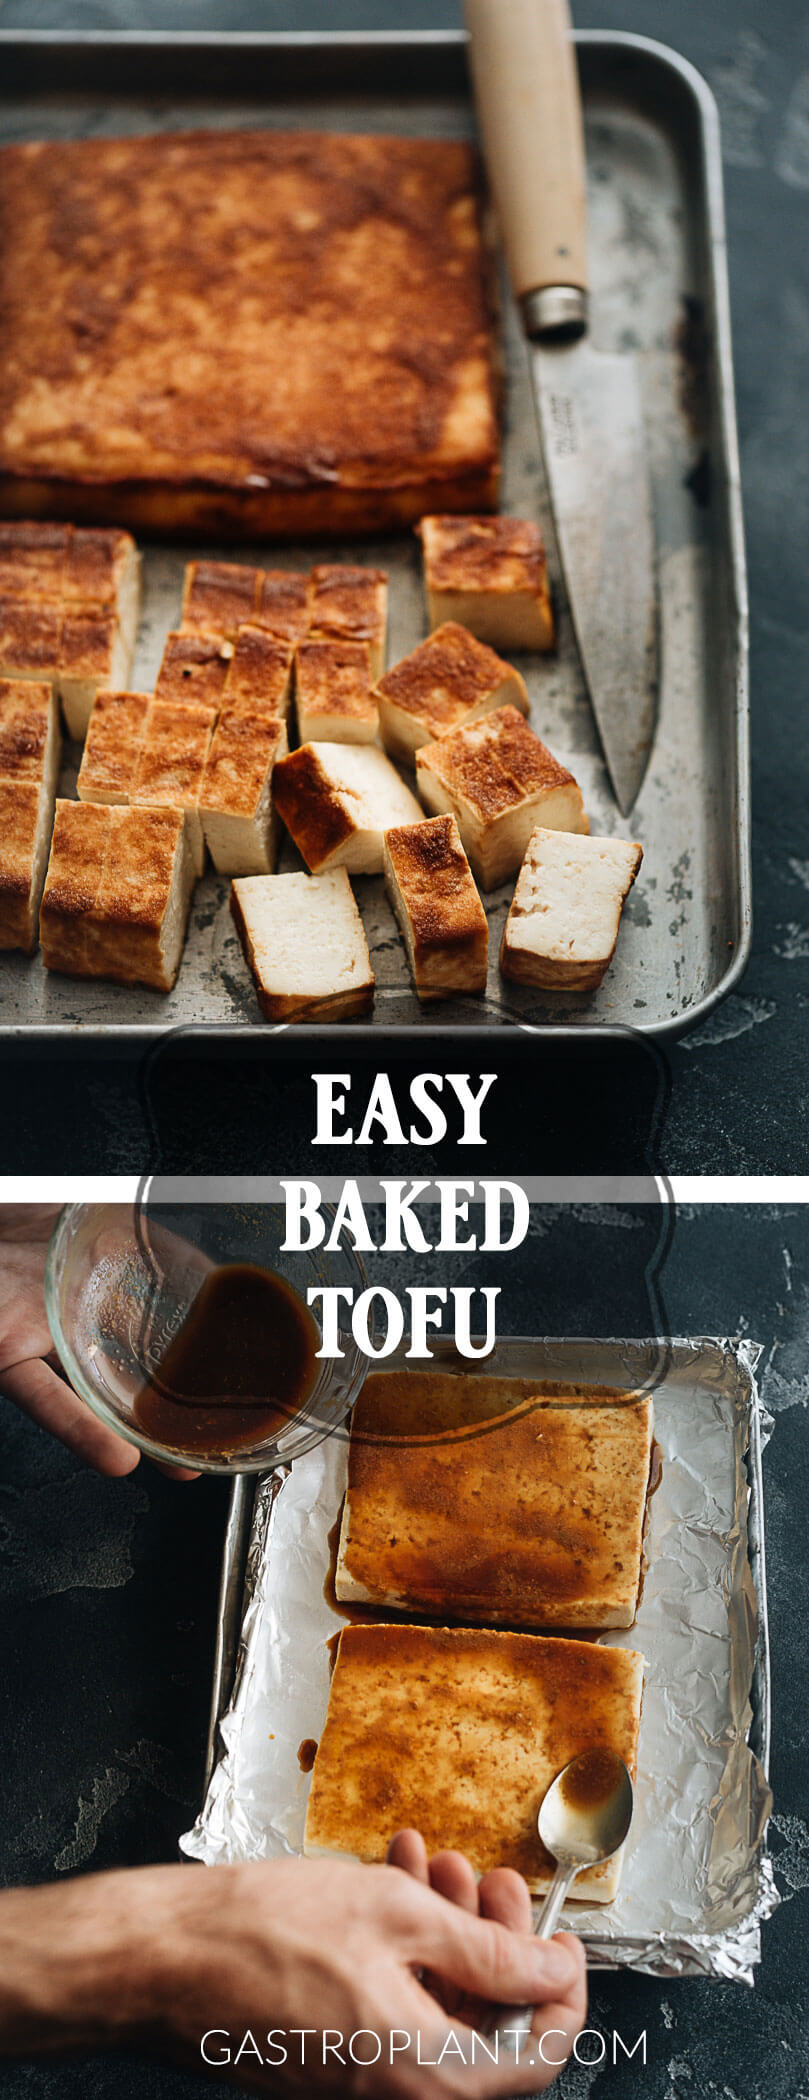 Easy baked tofu collage